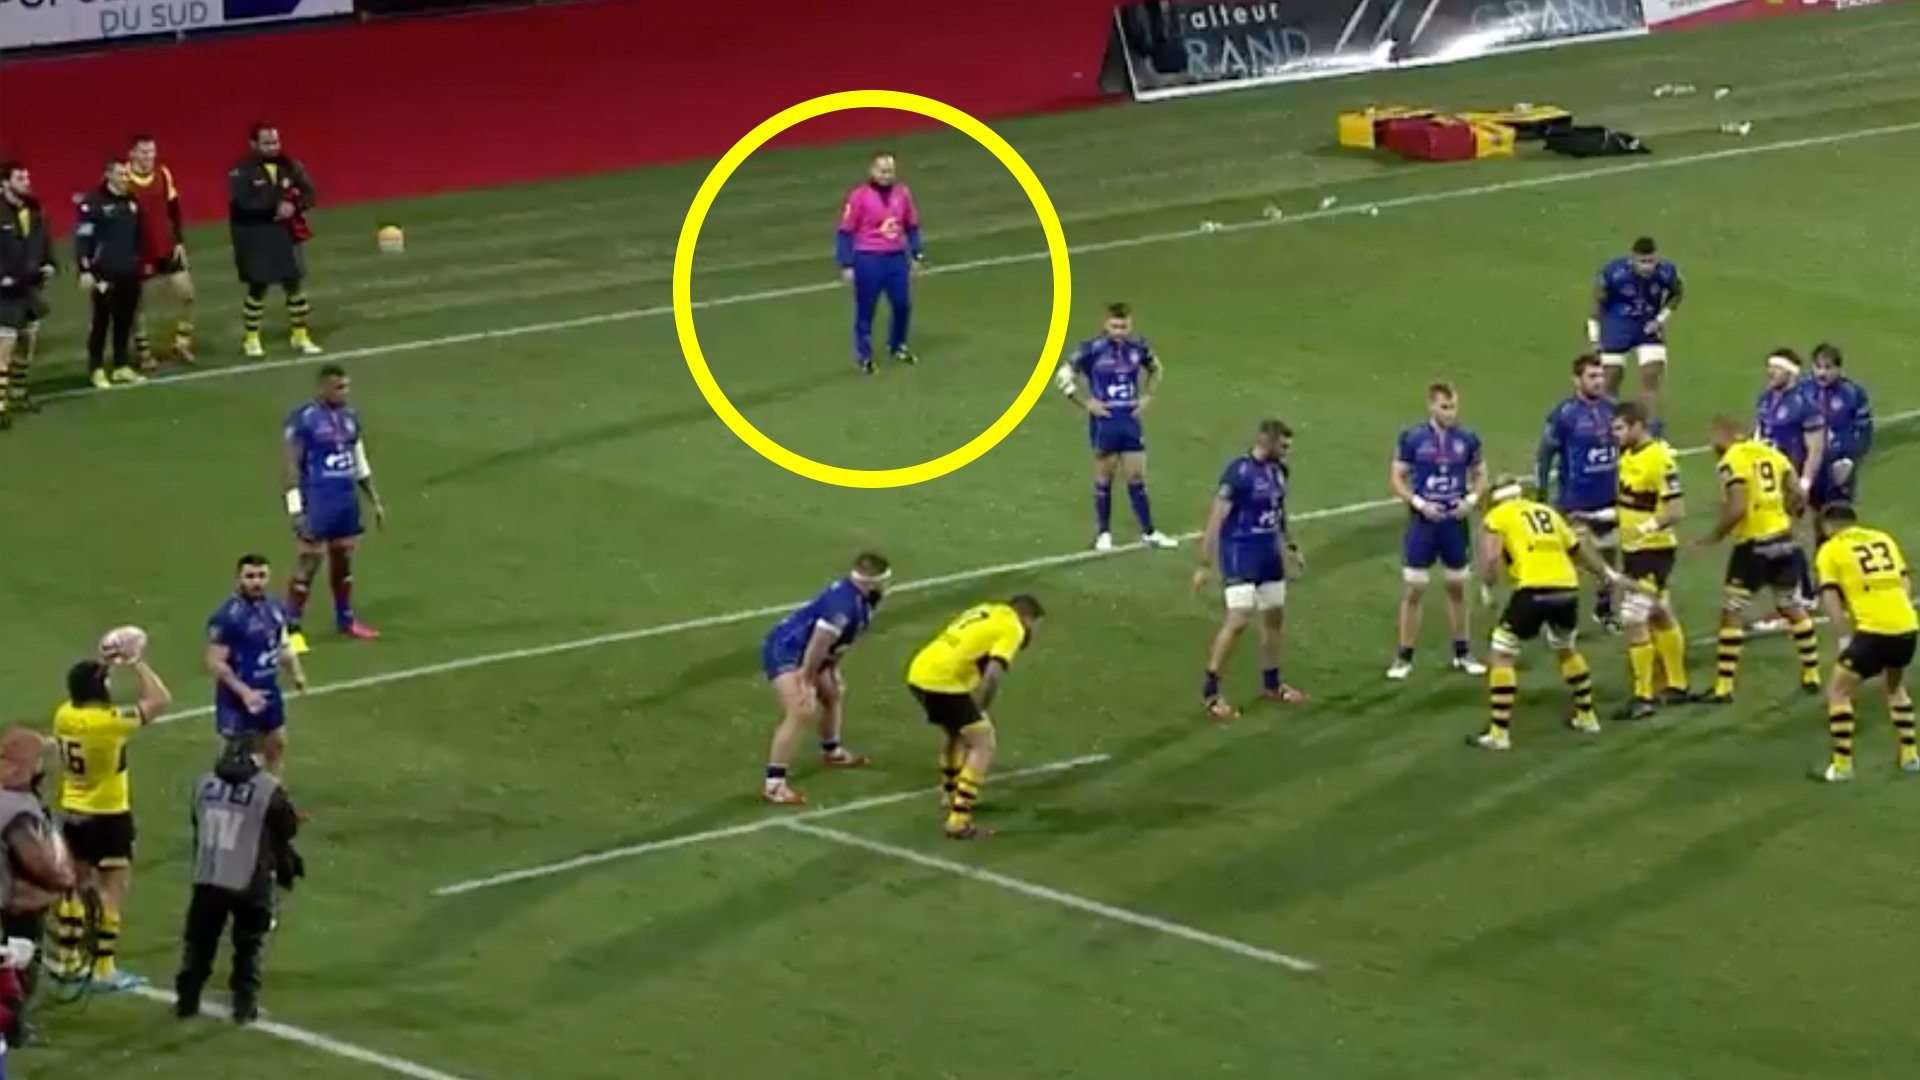 Quite possibly the most French try of the year was scored over the weekend